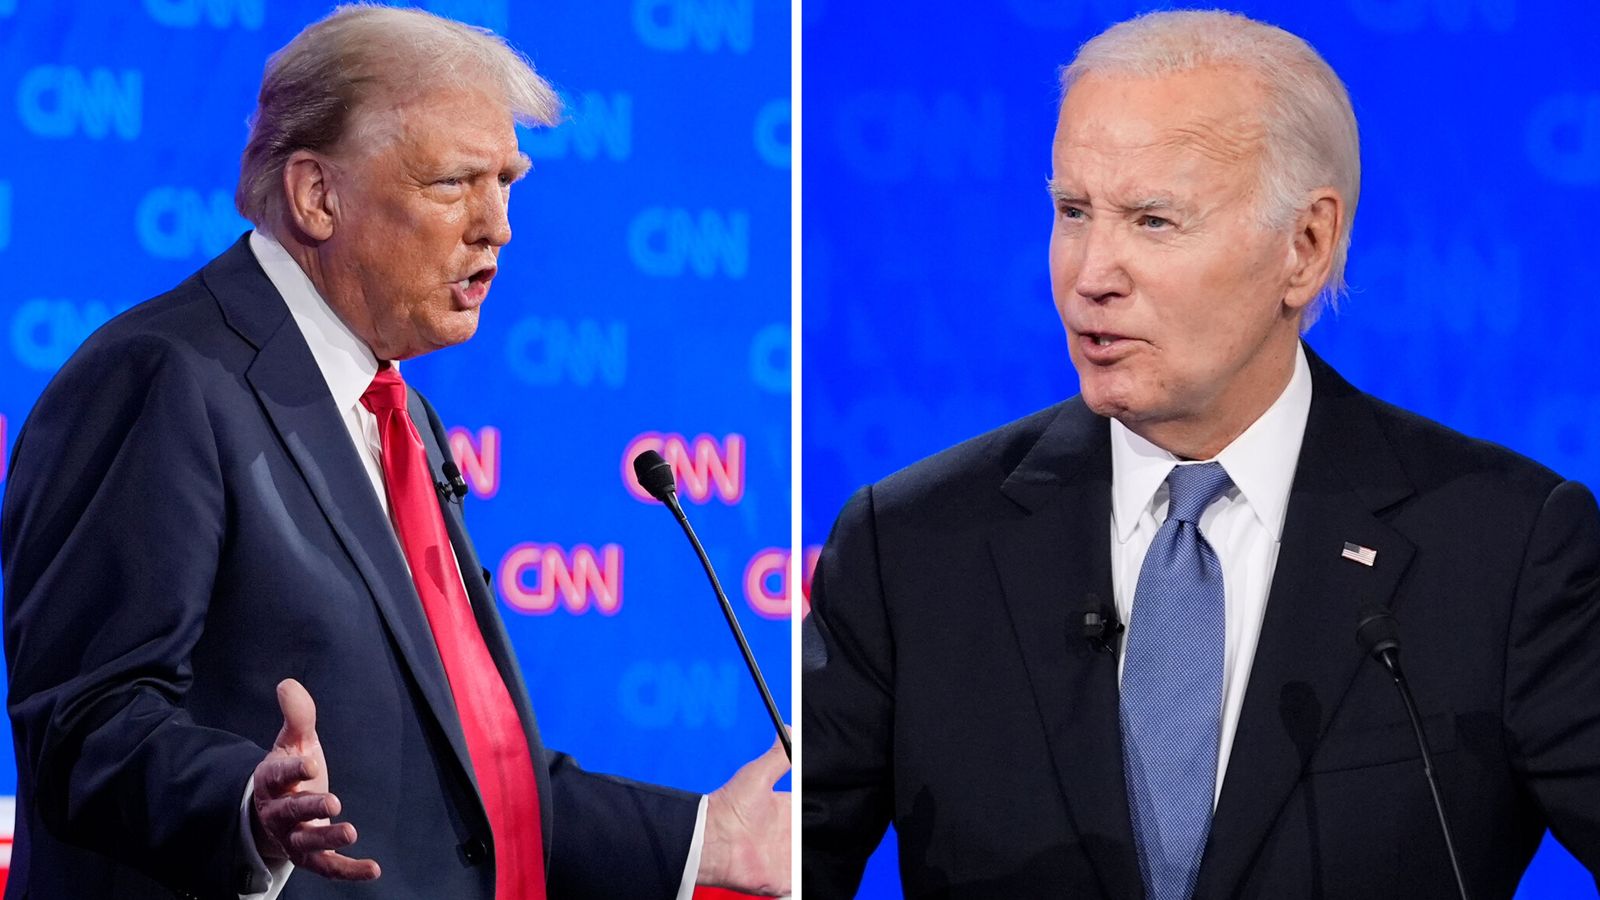 In command Trump and stumbling Biden face off in first presidential debate